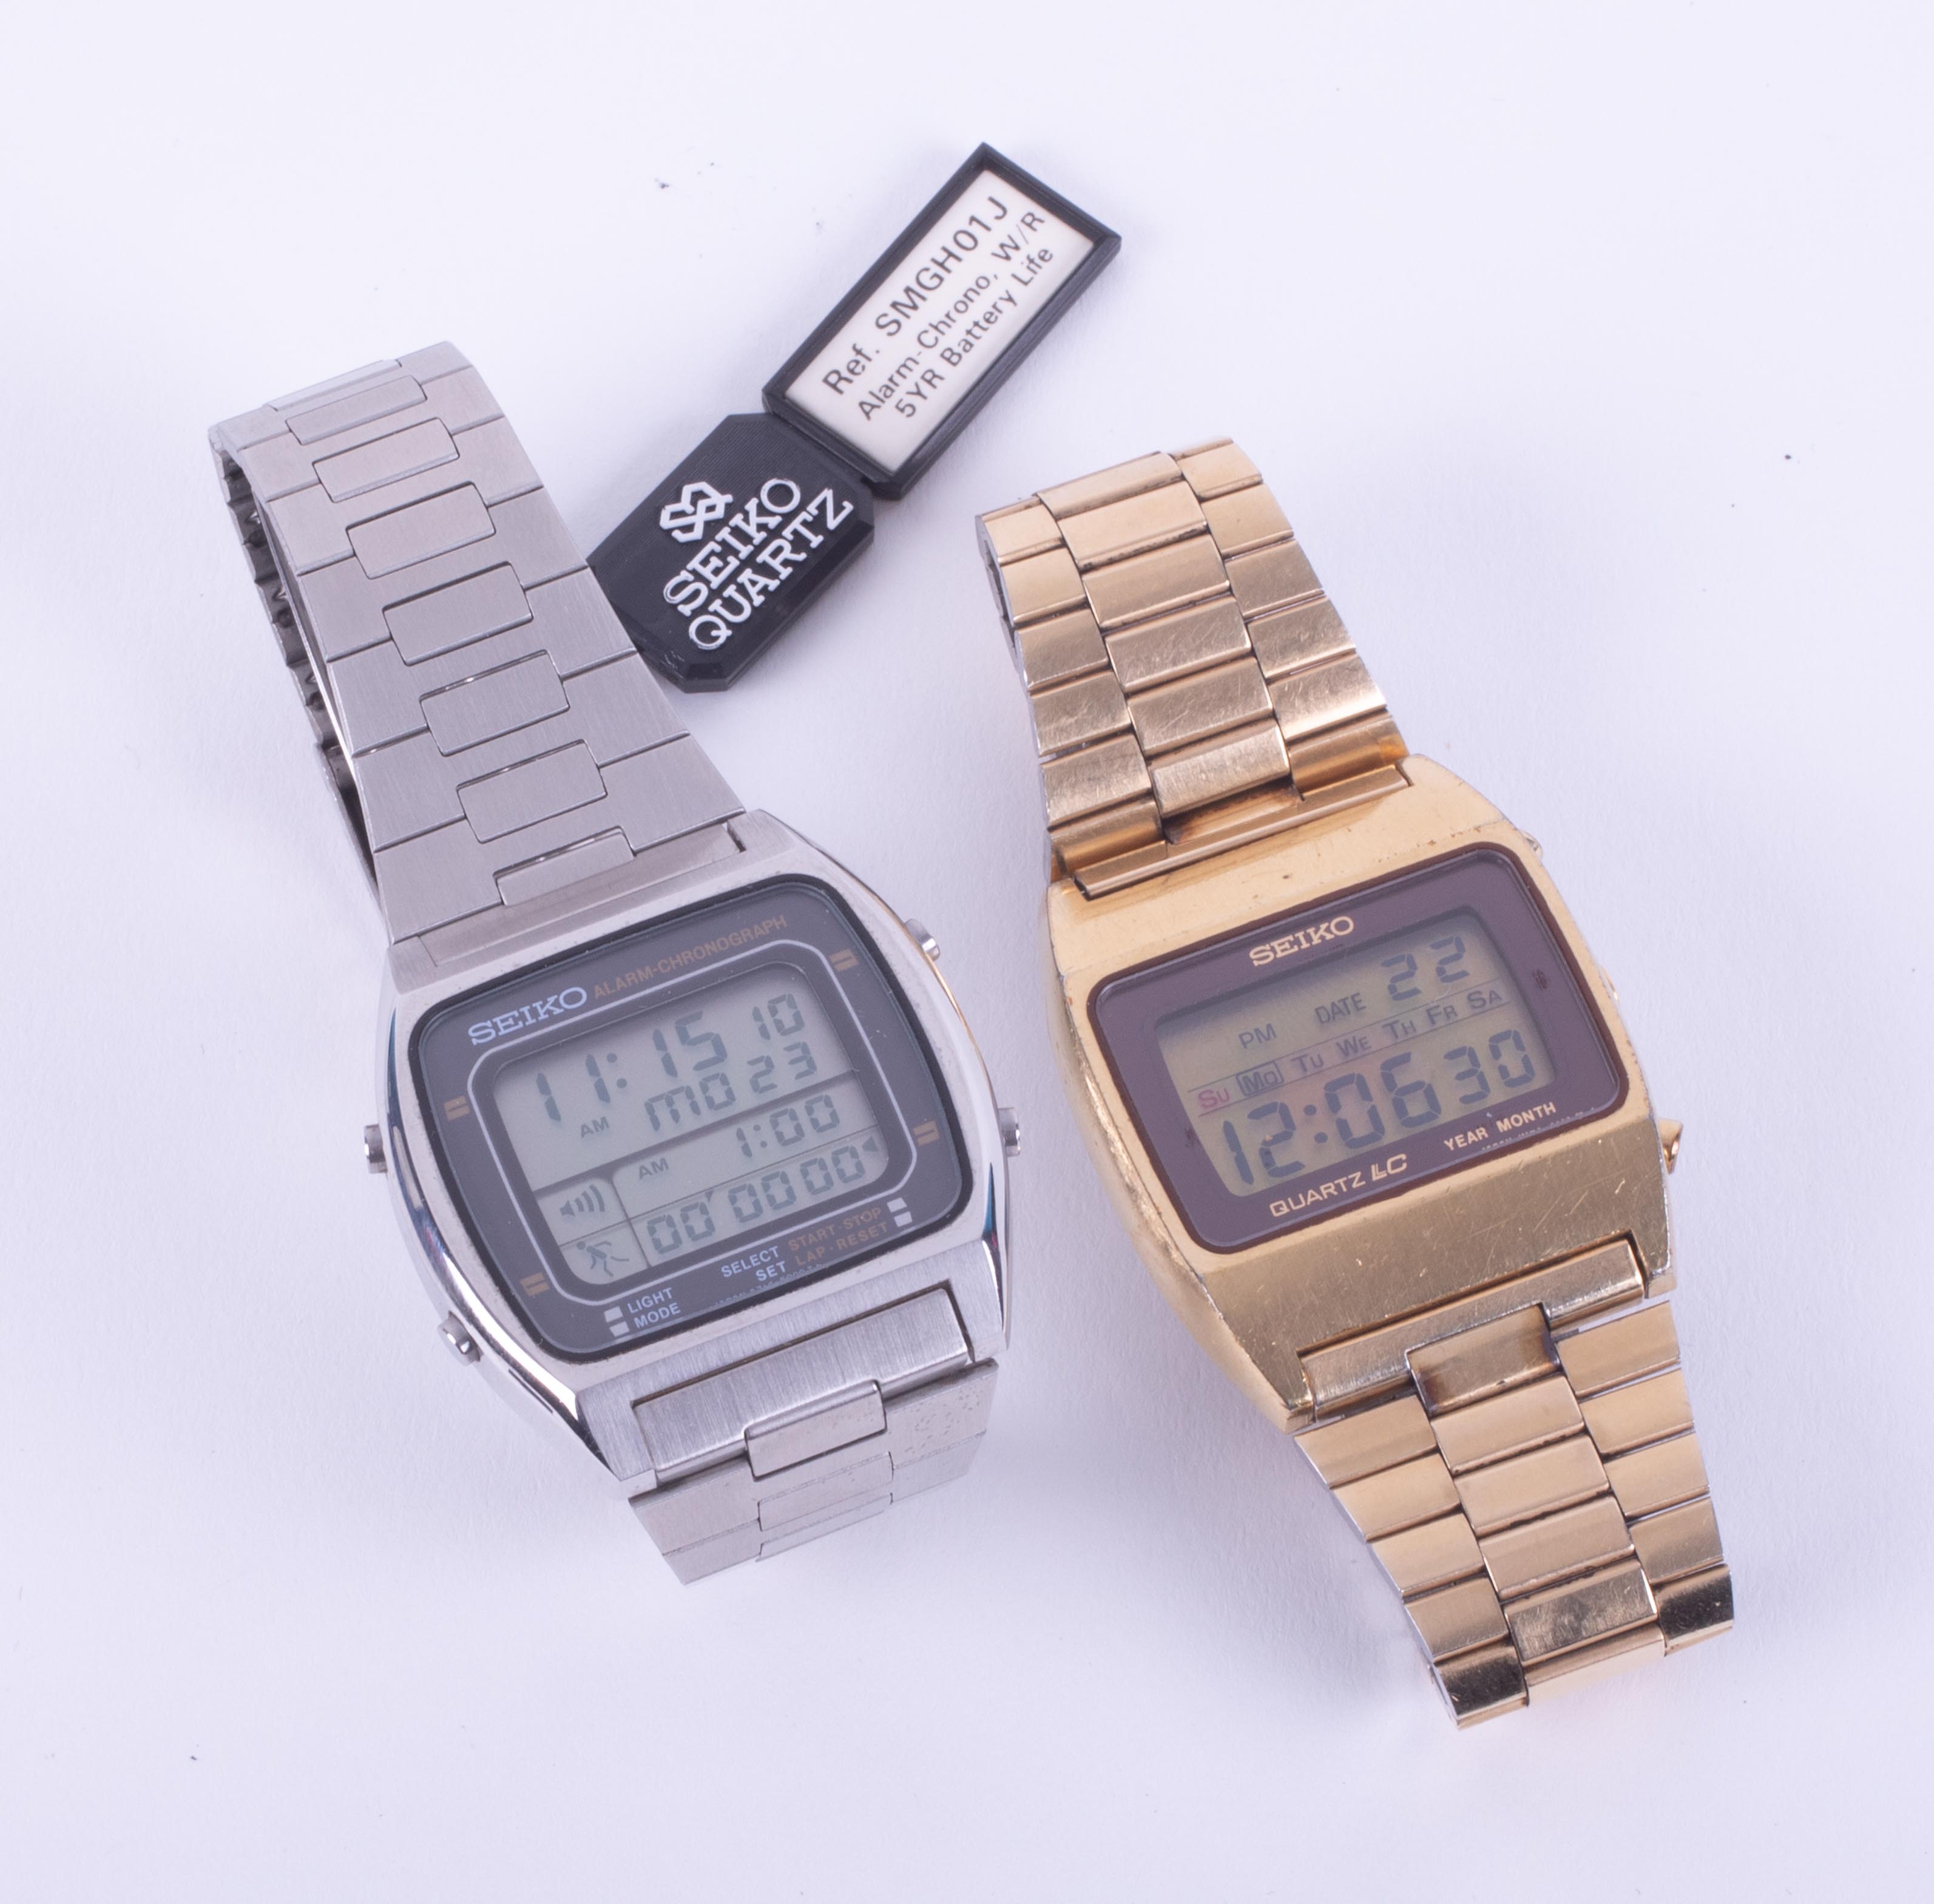 Two Seiko digital wristwatches stainless steel including reference smgh01j, alarm chrono and a